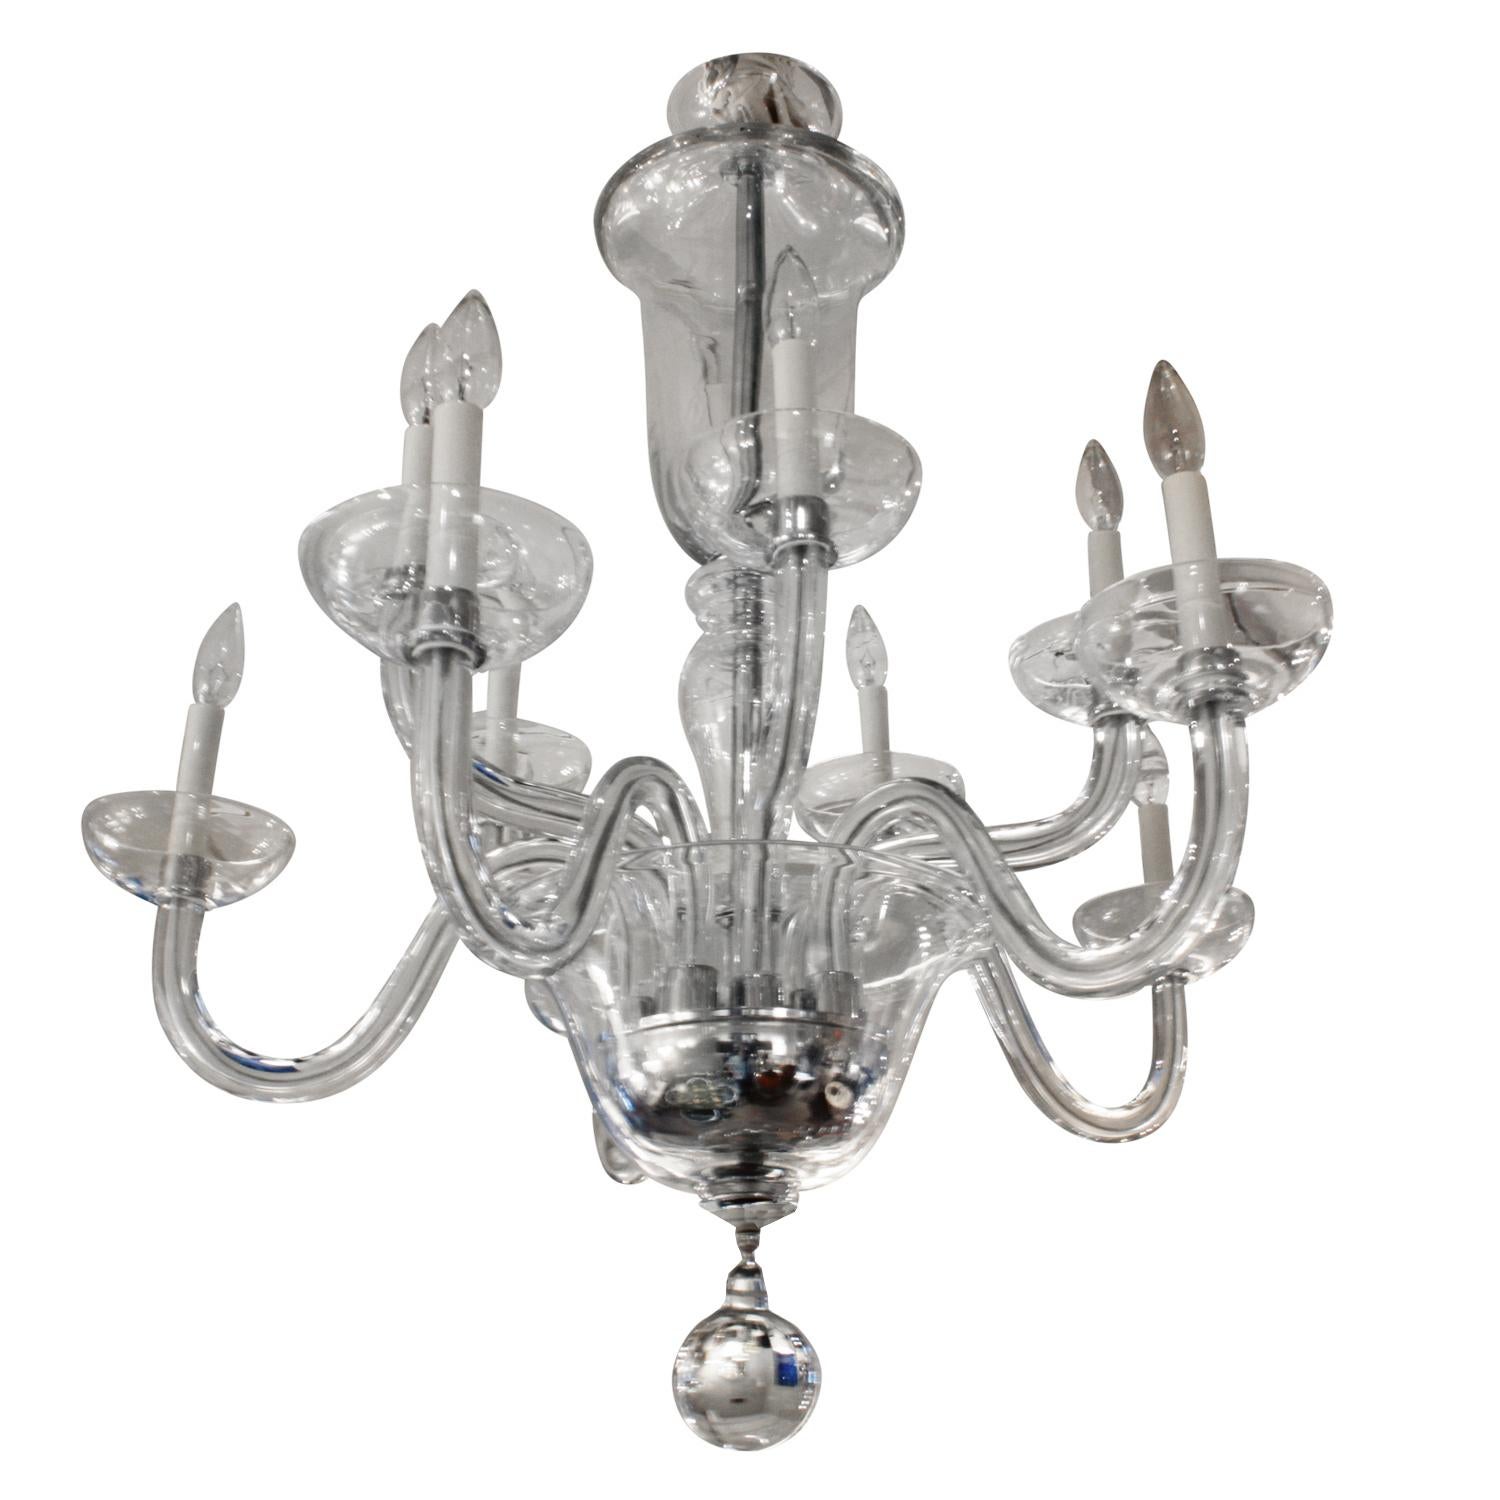 Multi-tier beautifully handblown glass chandelier by Seguso, Murano, Italy 1970s. Dimensions are for glass only and do not include chain or fabric cover which can be customized.